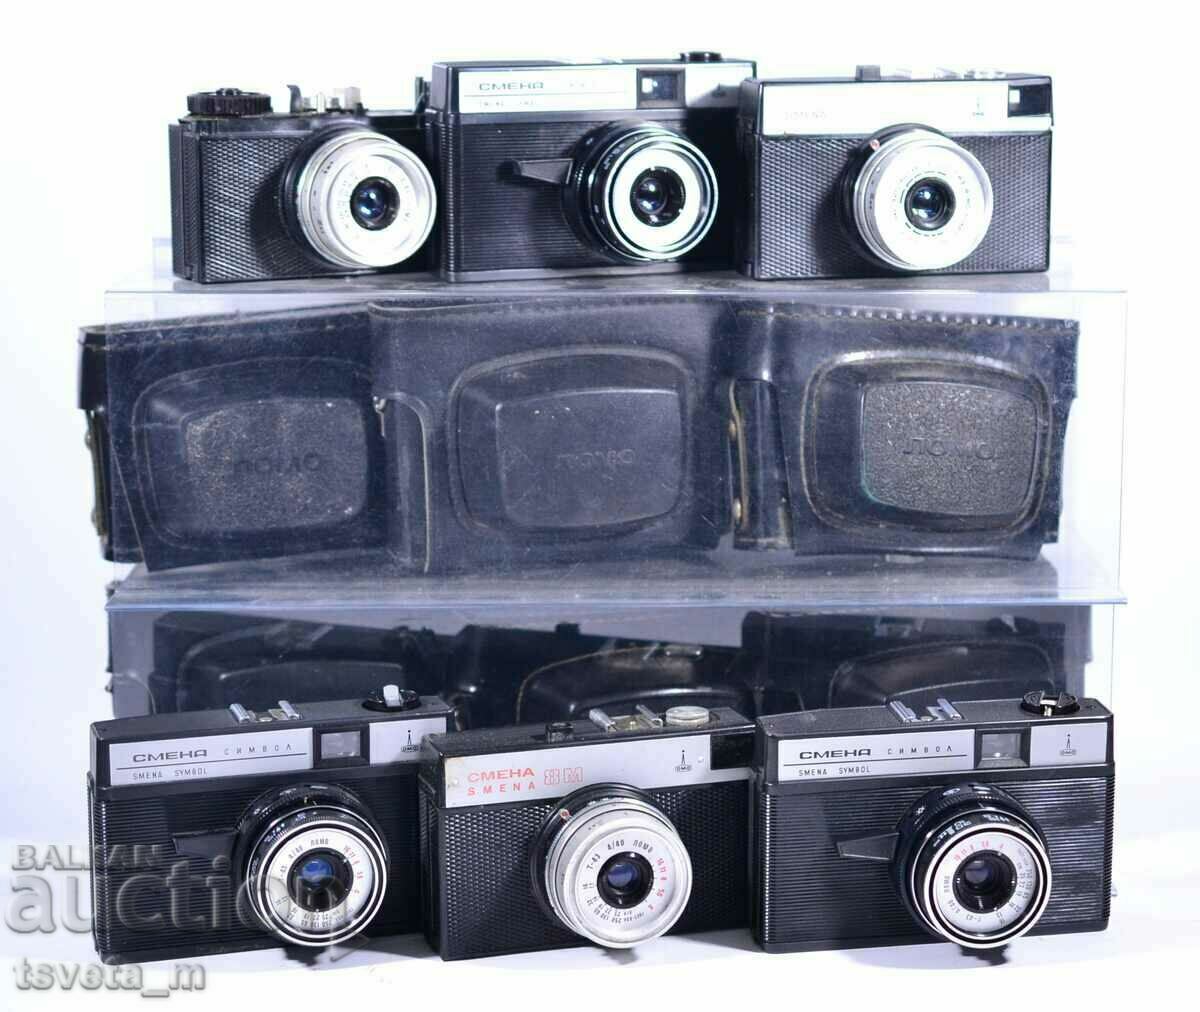 Lot of 6 pcs. cameras EXCHANGE - for repair or parts